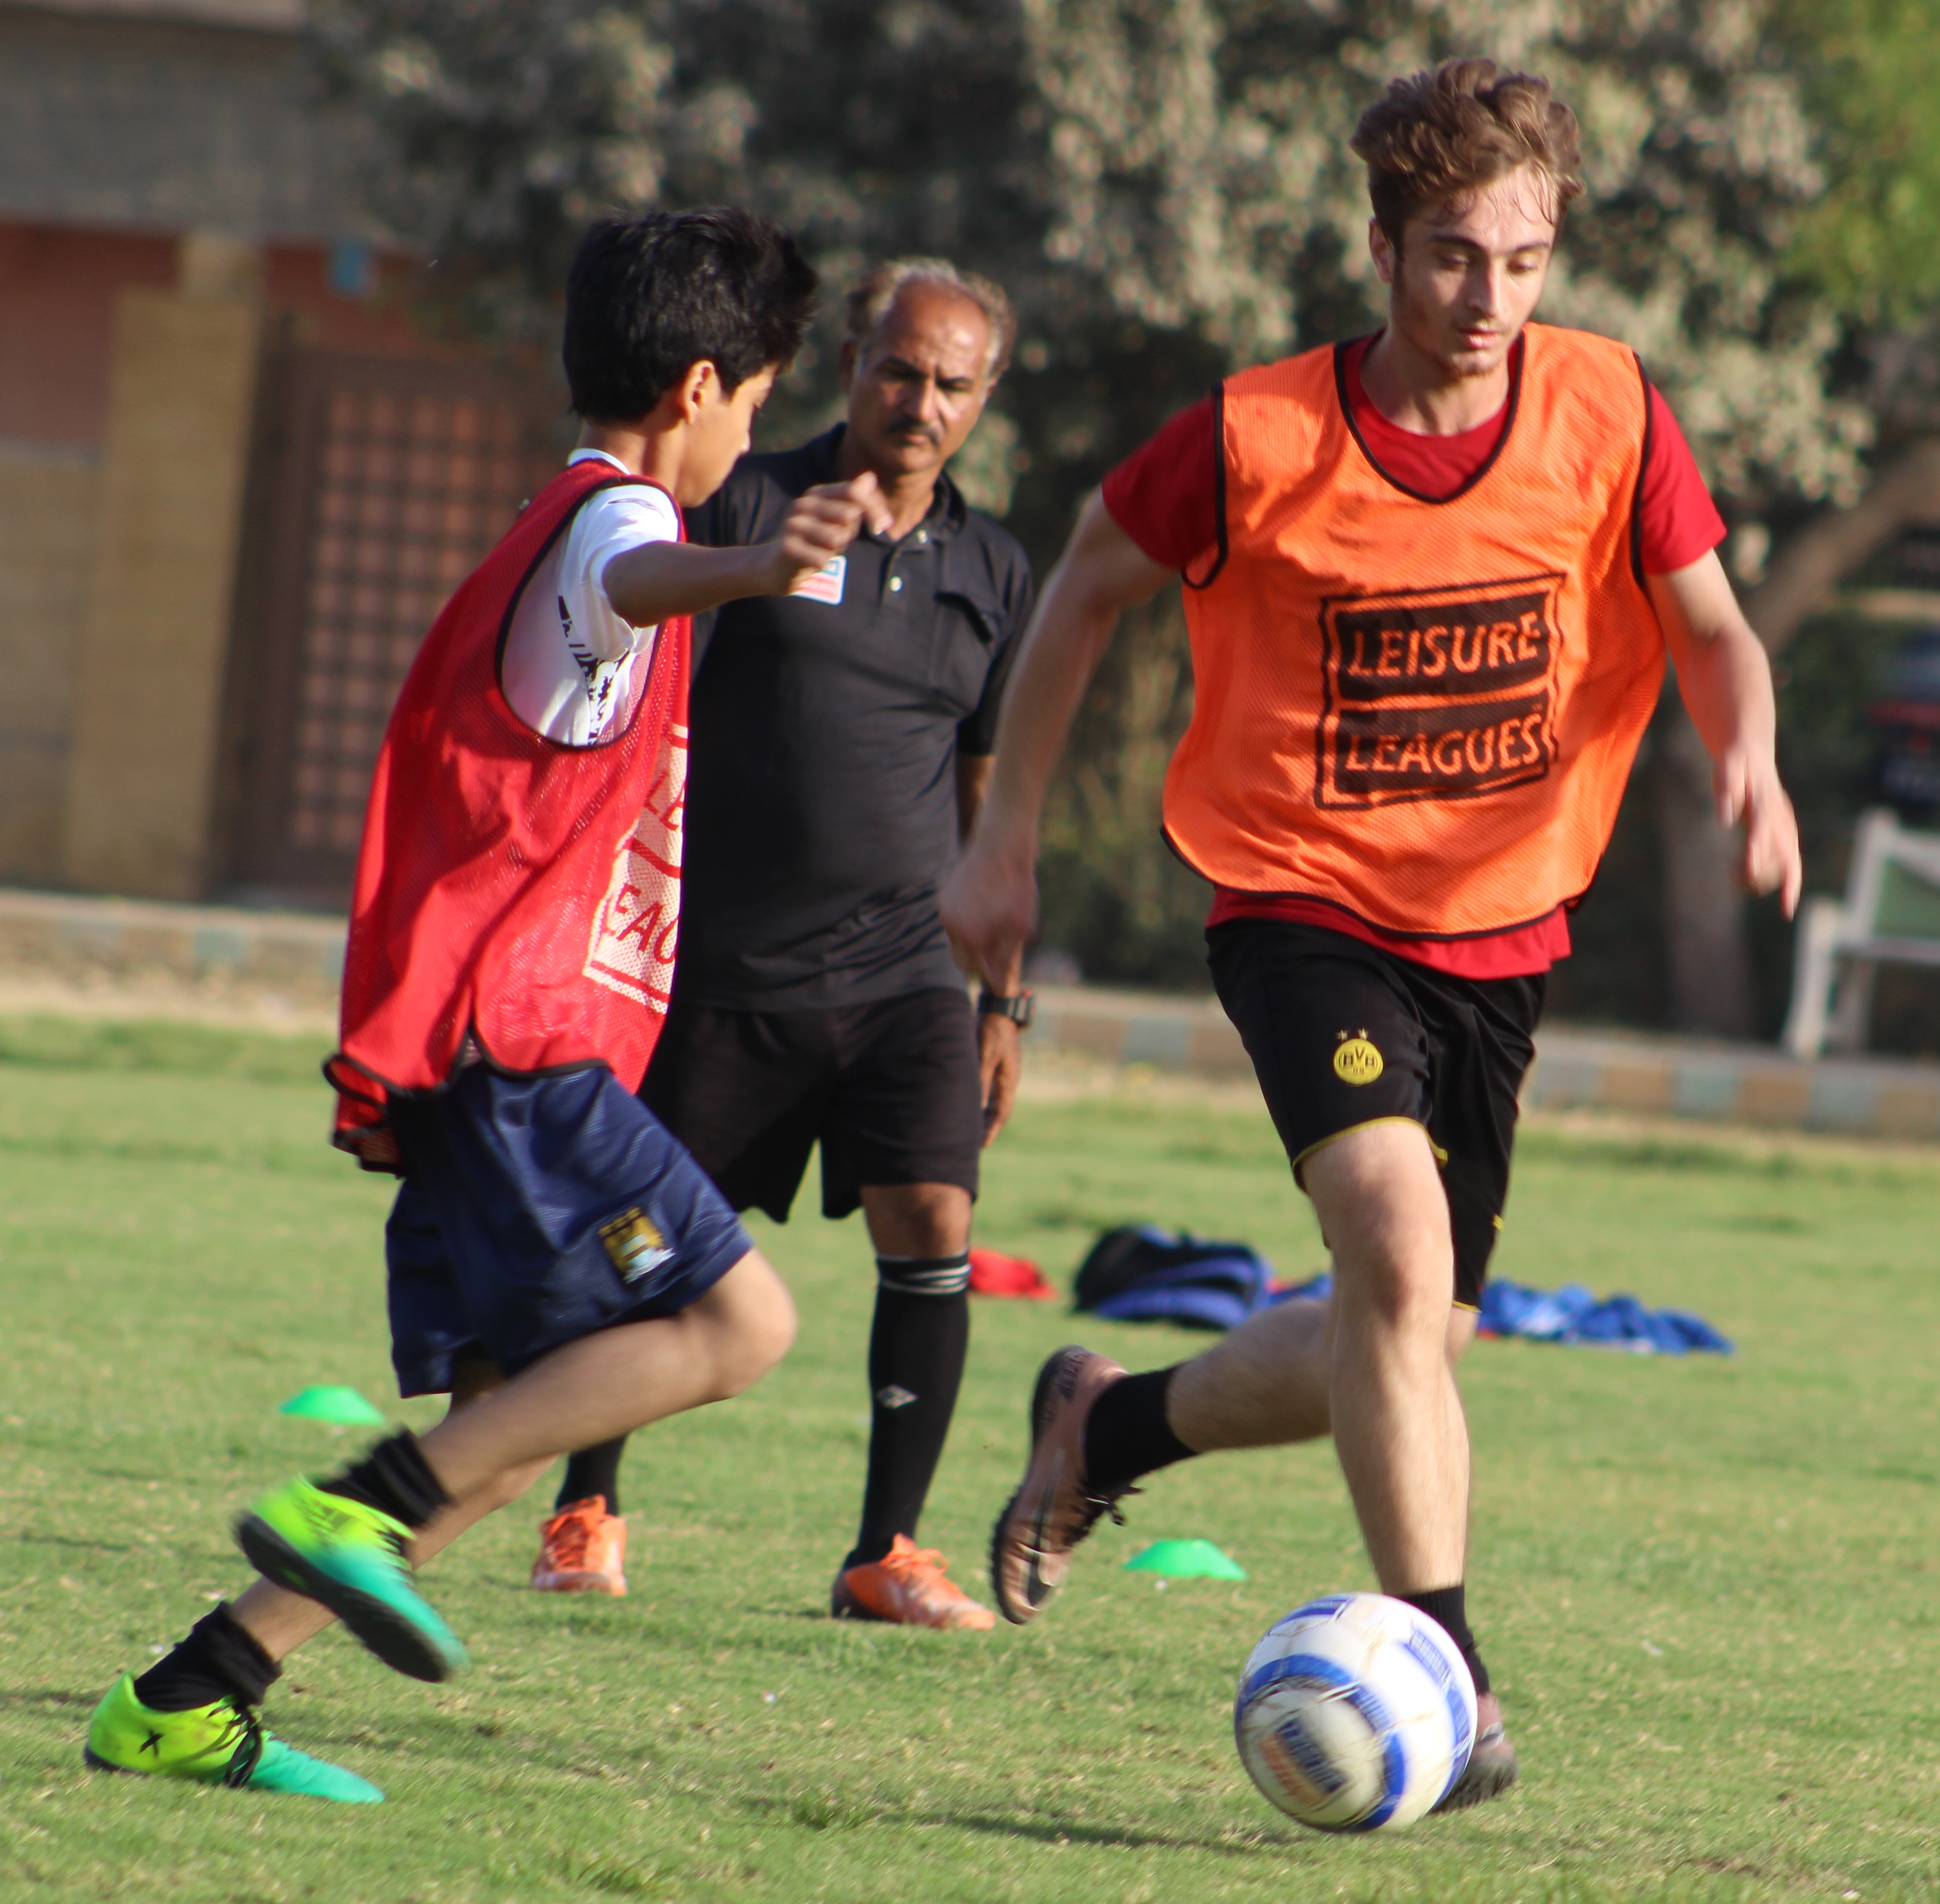 FC Evolution thrashes Sir Syed FC by 2-0 in   Leisure Leagues Season III